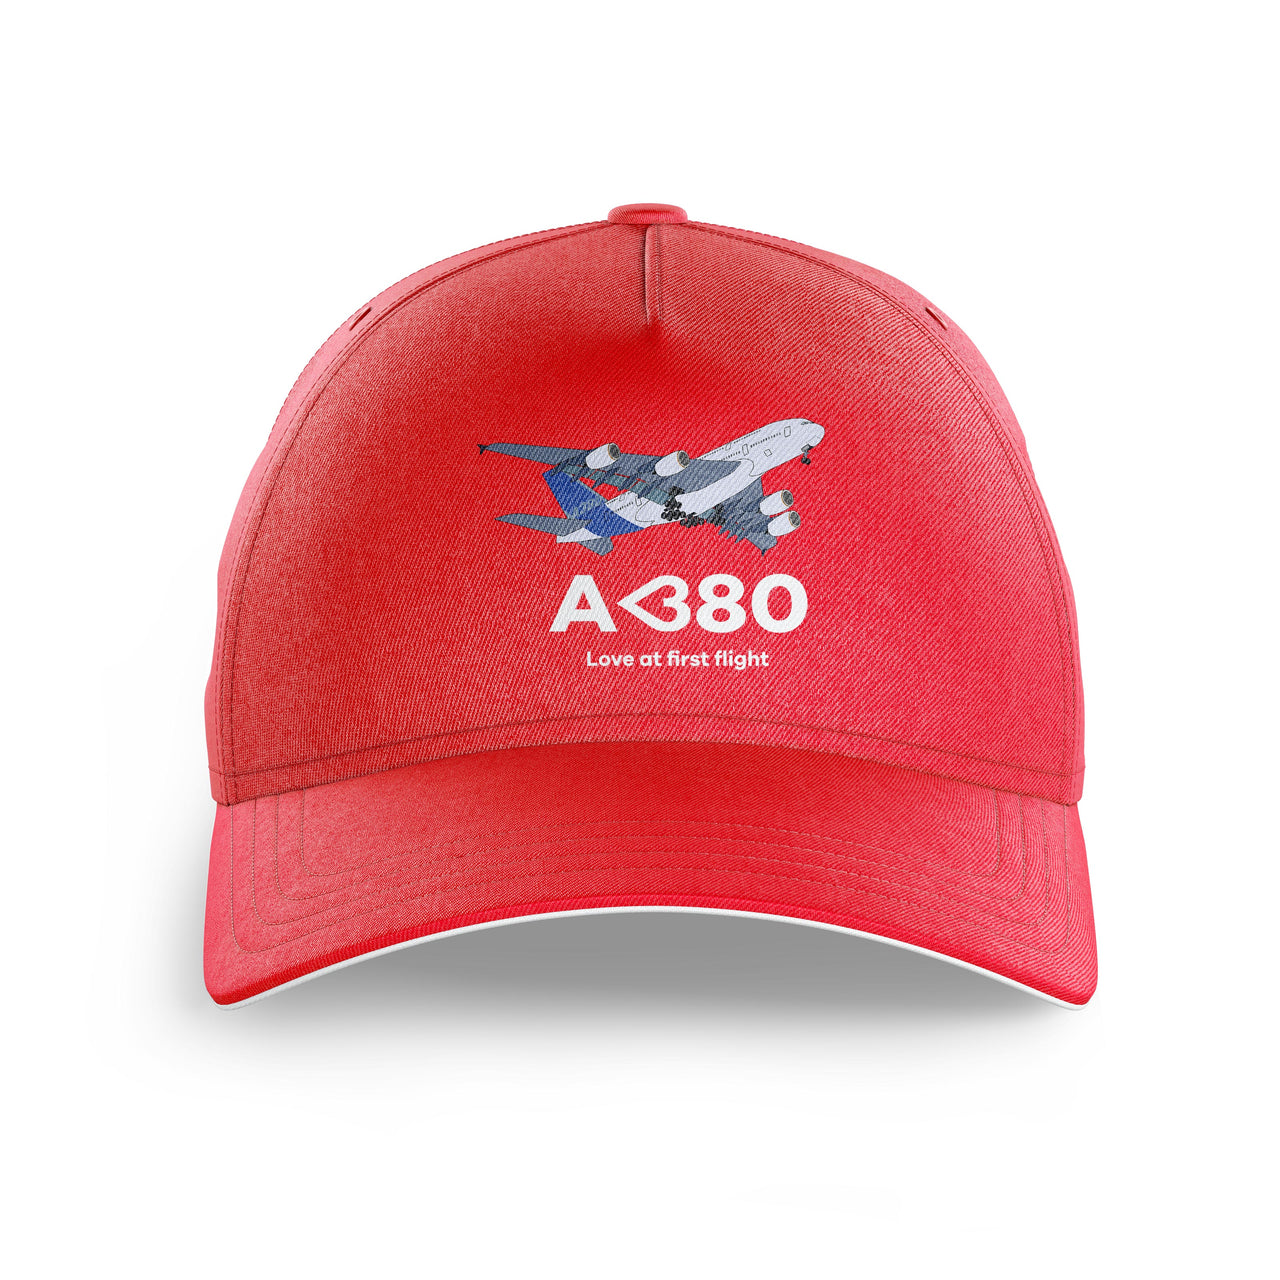 Airbus A380 Love at first flight Printed Hats